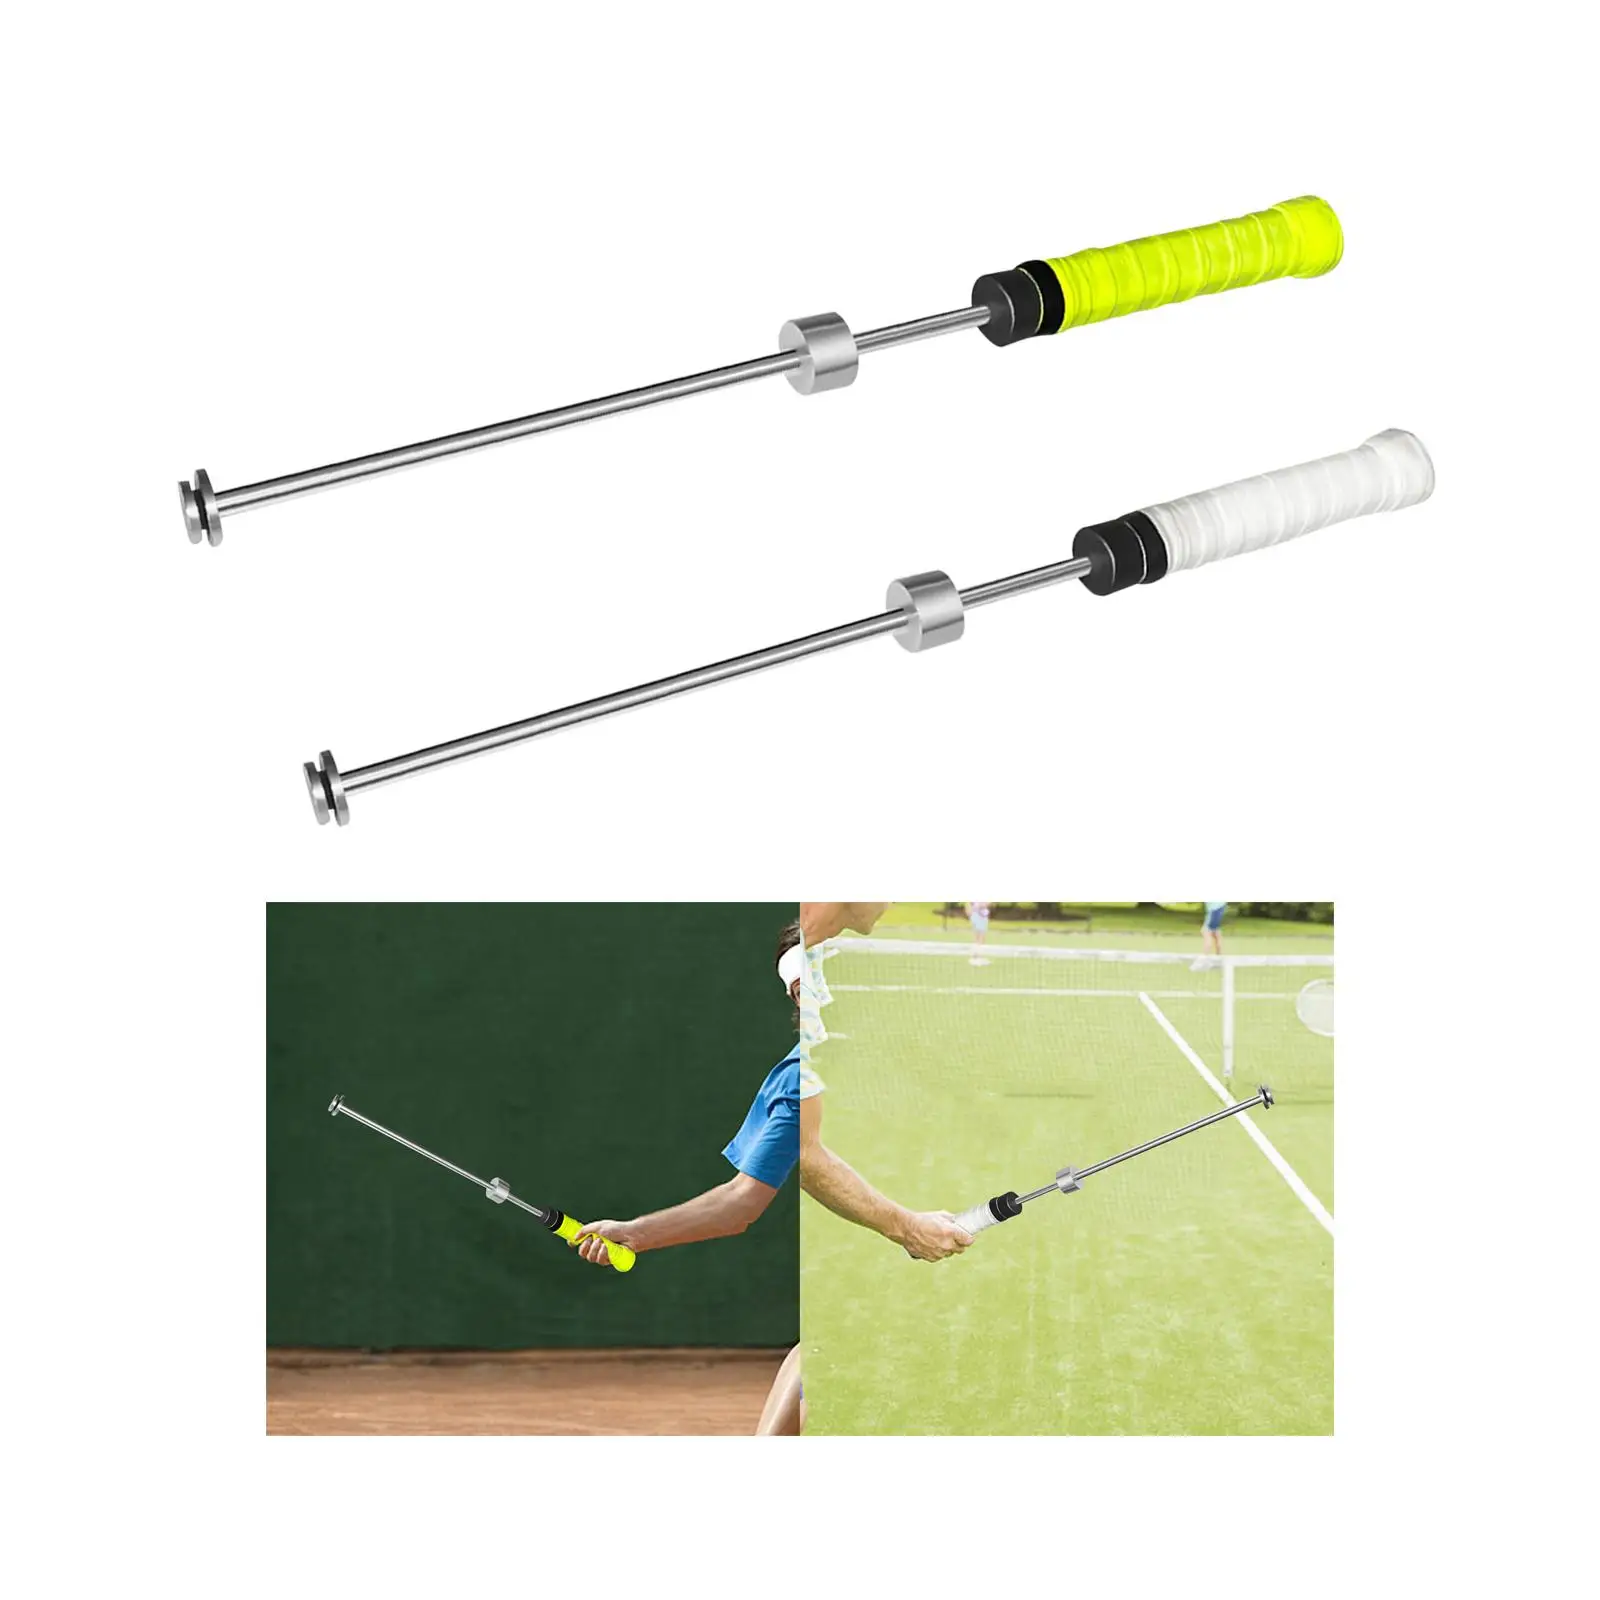 Sound Remind Exercise Sports Tool Tennis Swing Training Portable Tennis Swing Trainer Aid